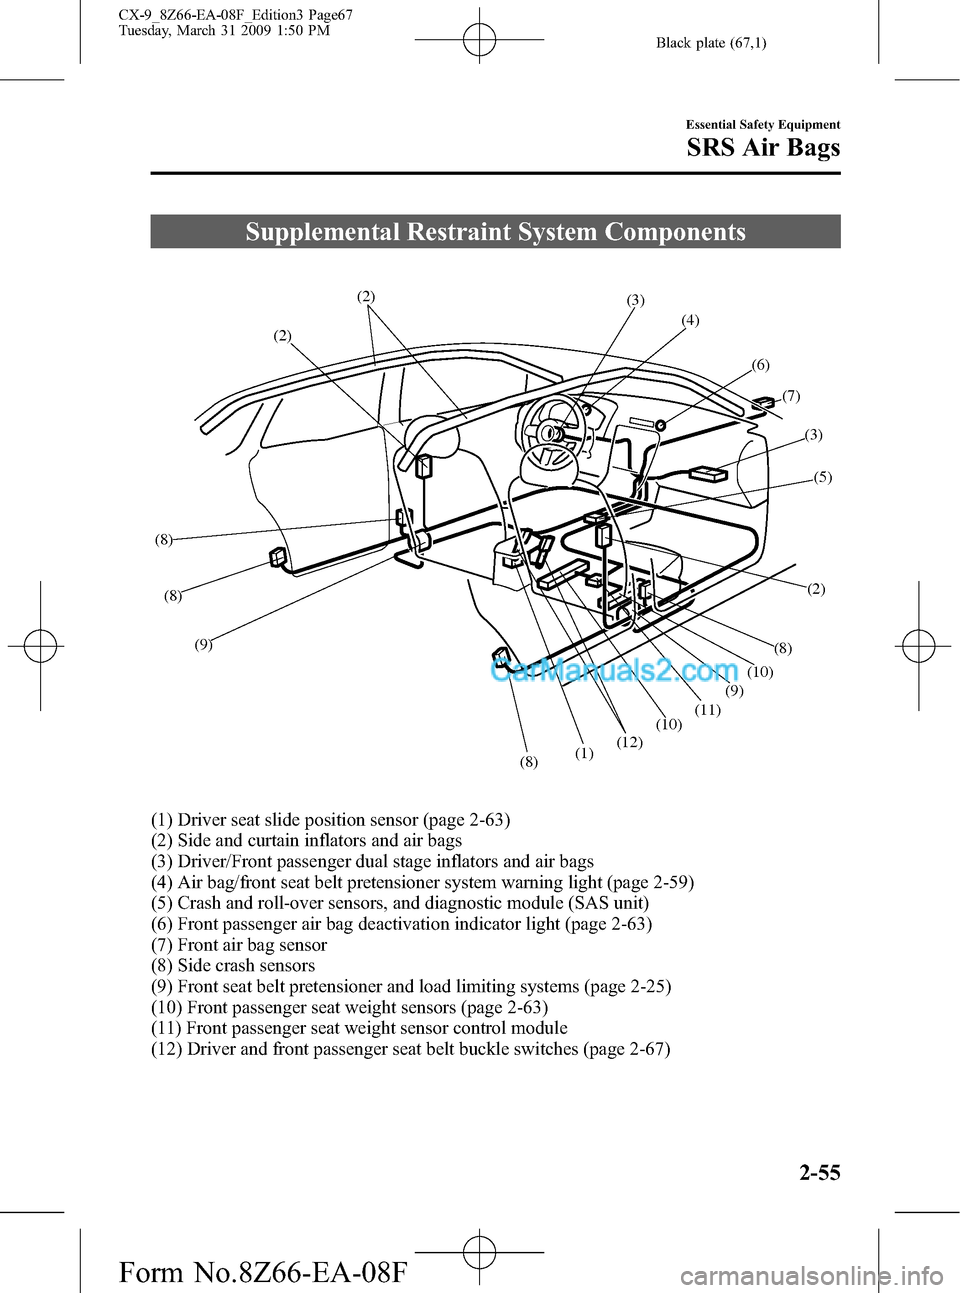 MAZDA MODEL CX-9 2009  Owners Manual (in English) Black plate (67,1)
Supplemental Restraint System Components
(1)(11)
(12)(7) (6)
(9)(5) (4) (3)
(3)
(10)(8)
(8) (8)
(2)
(10) (9) (8)(2)(2)
(1) Driver seat slide position sensor (page 2-63)
(2) Side and